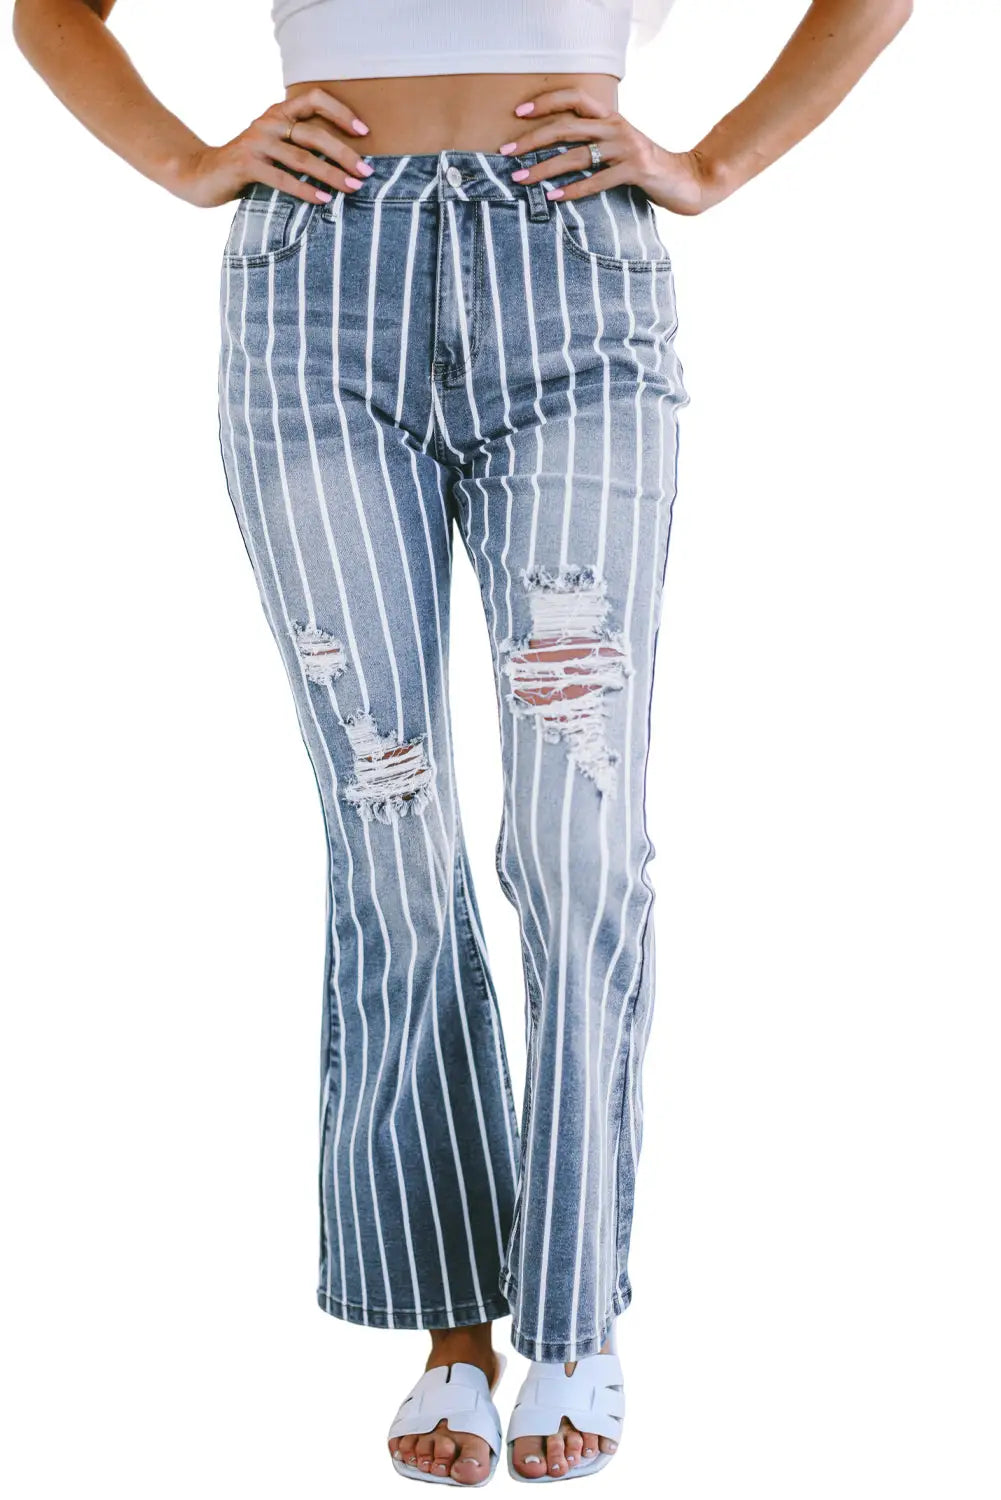 Sky blue vertical striped ripped flare jeans